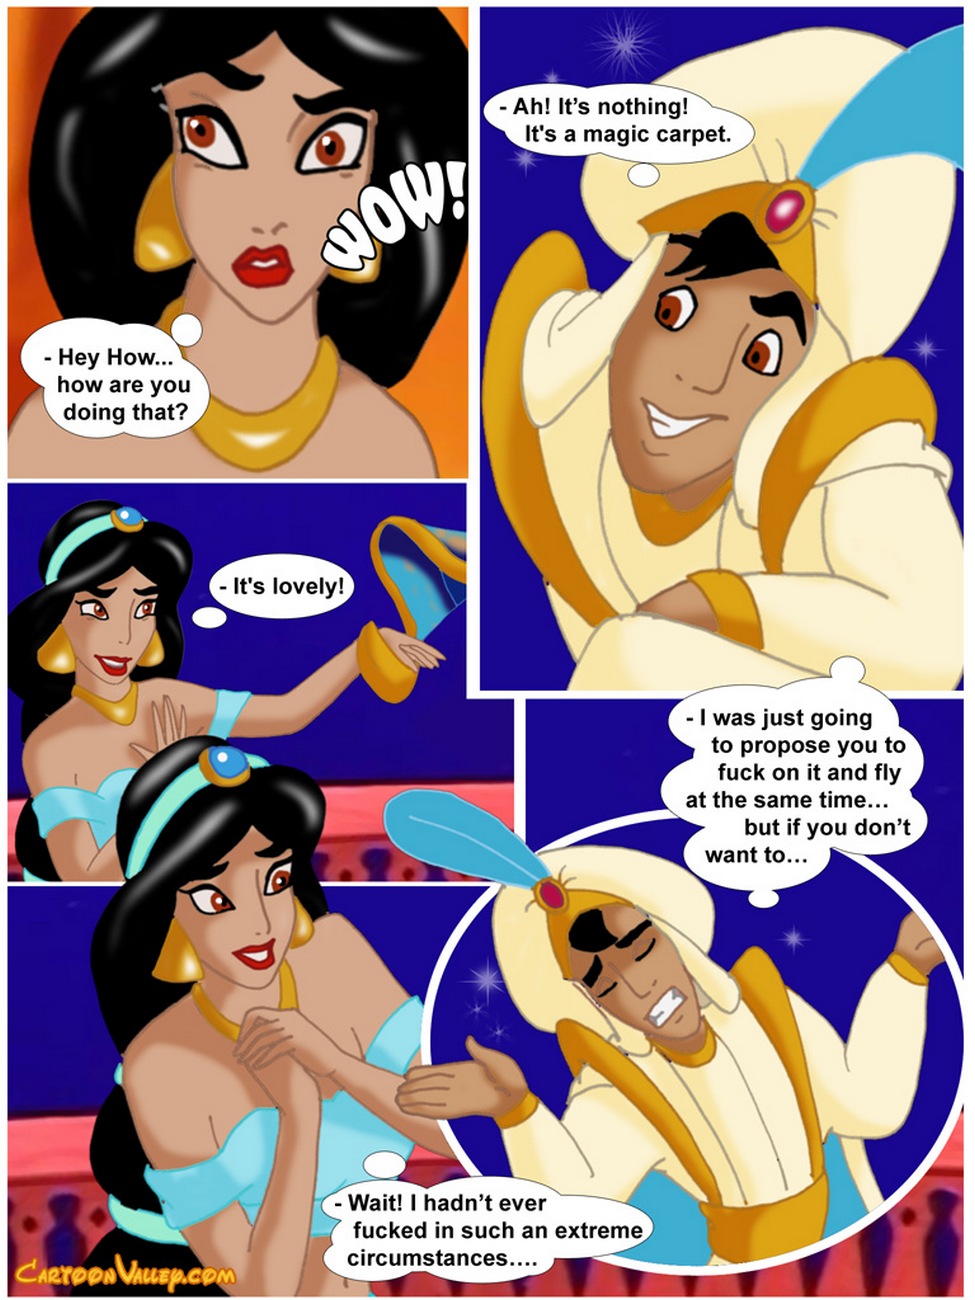 Aladdin - The Fucker From Agrabah - part 4